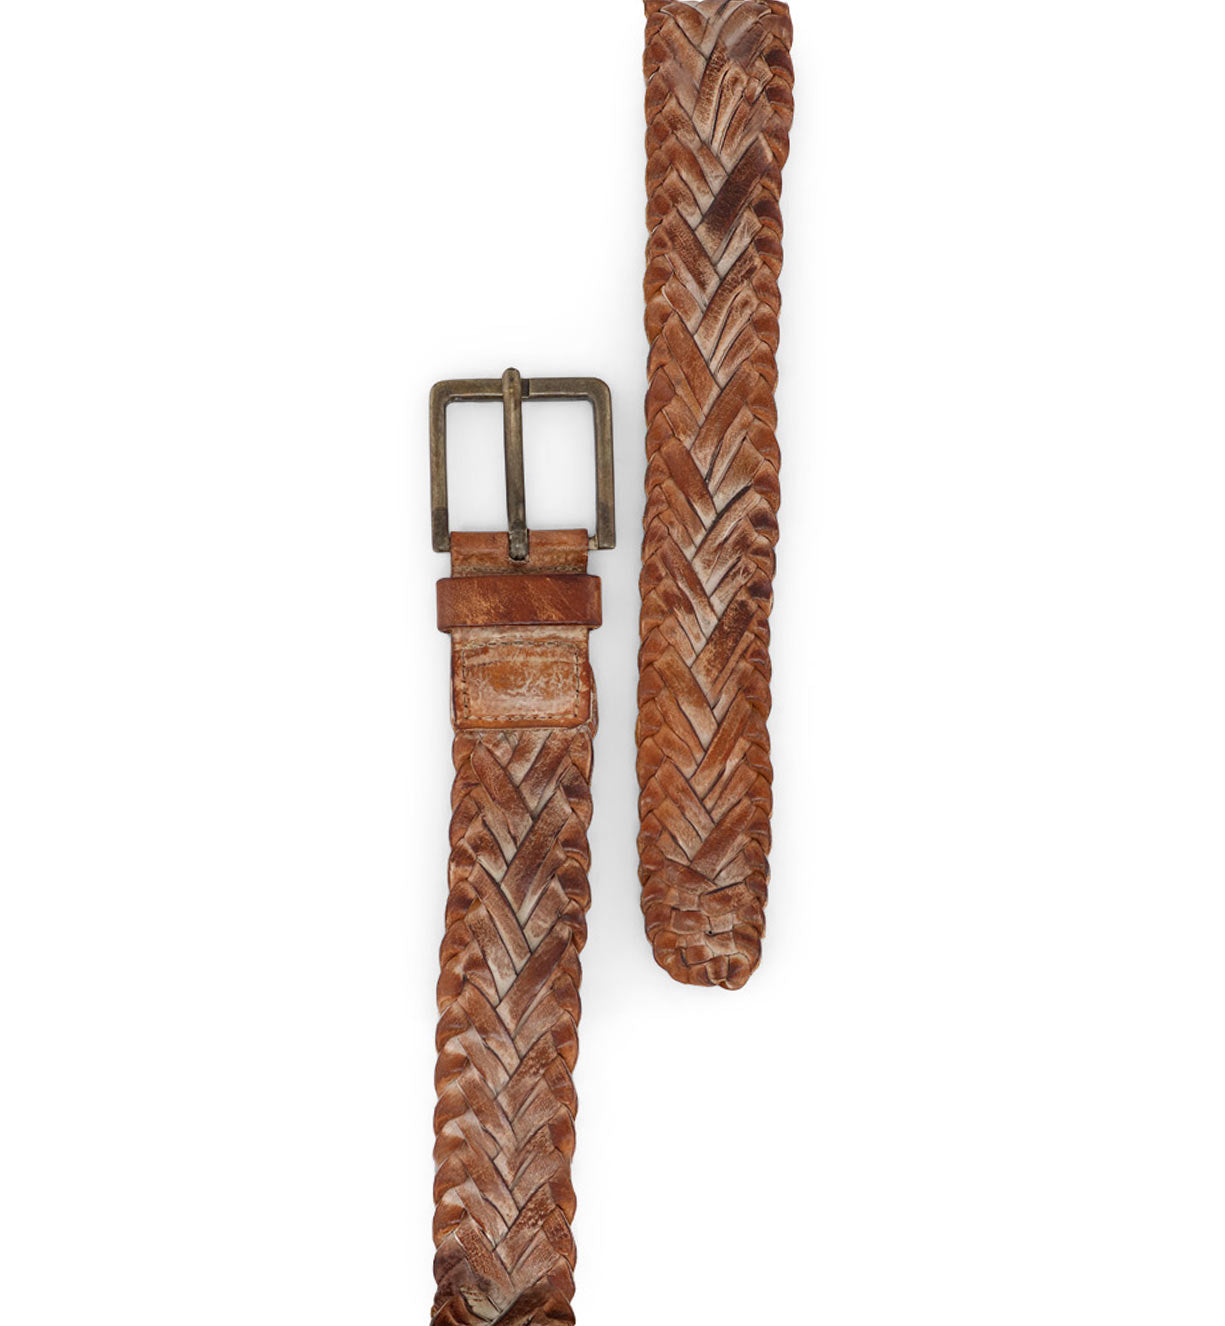 A brown braided belt with a metal buckle, the Proem by Bed Stu.